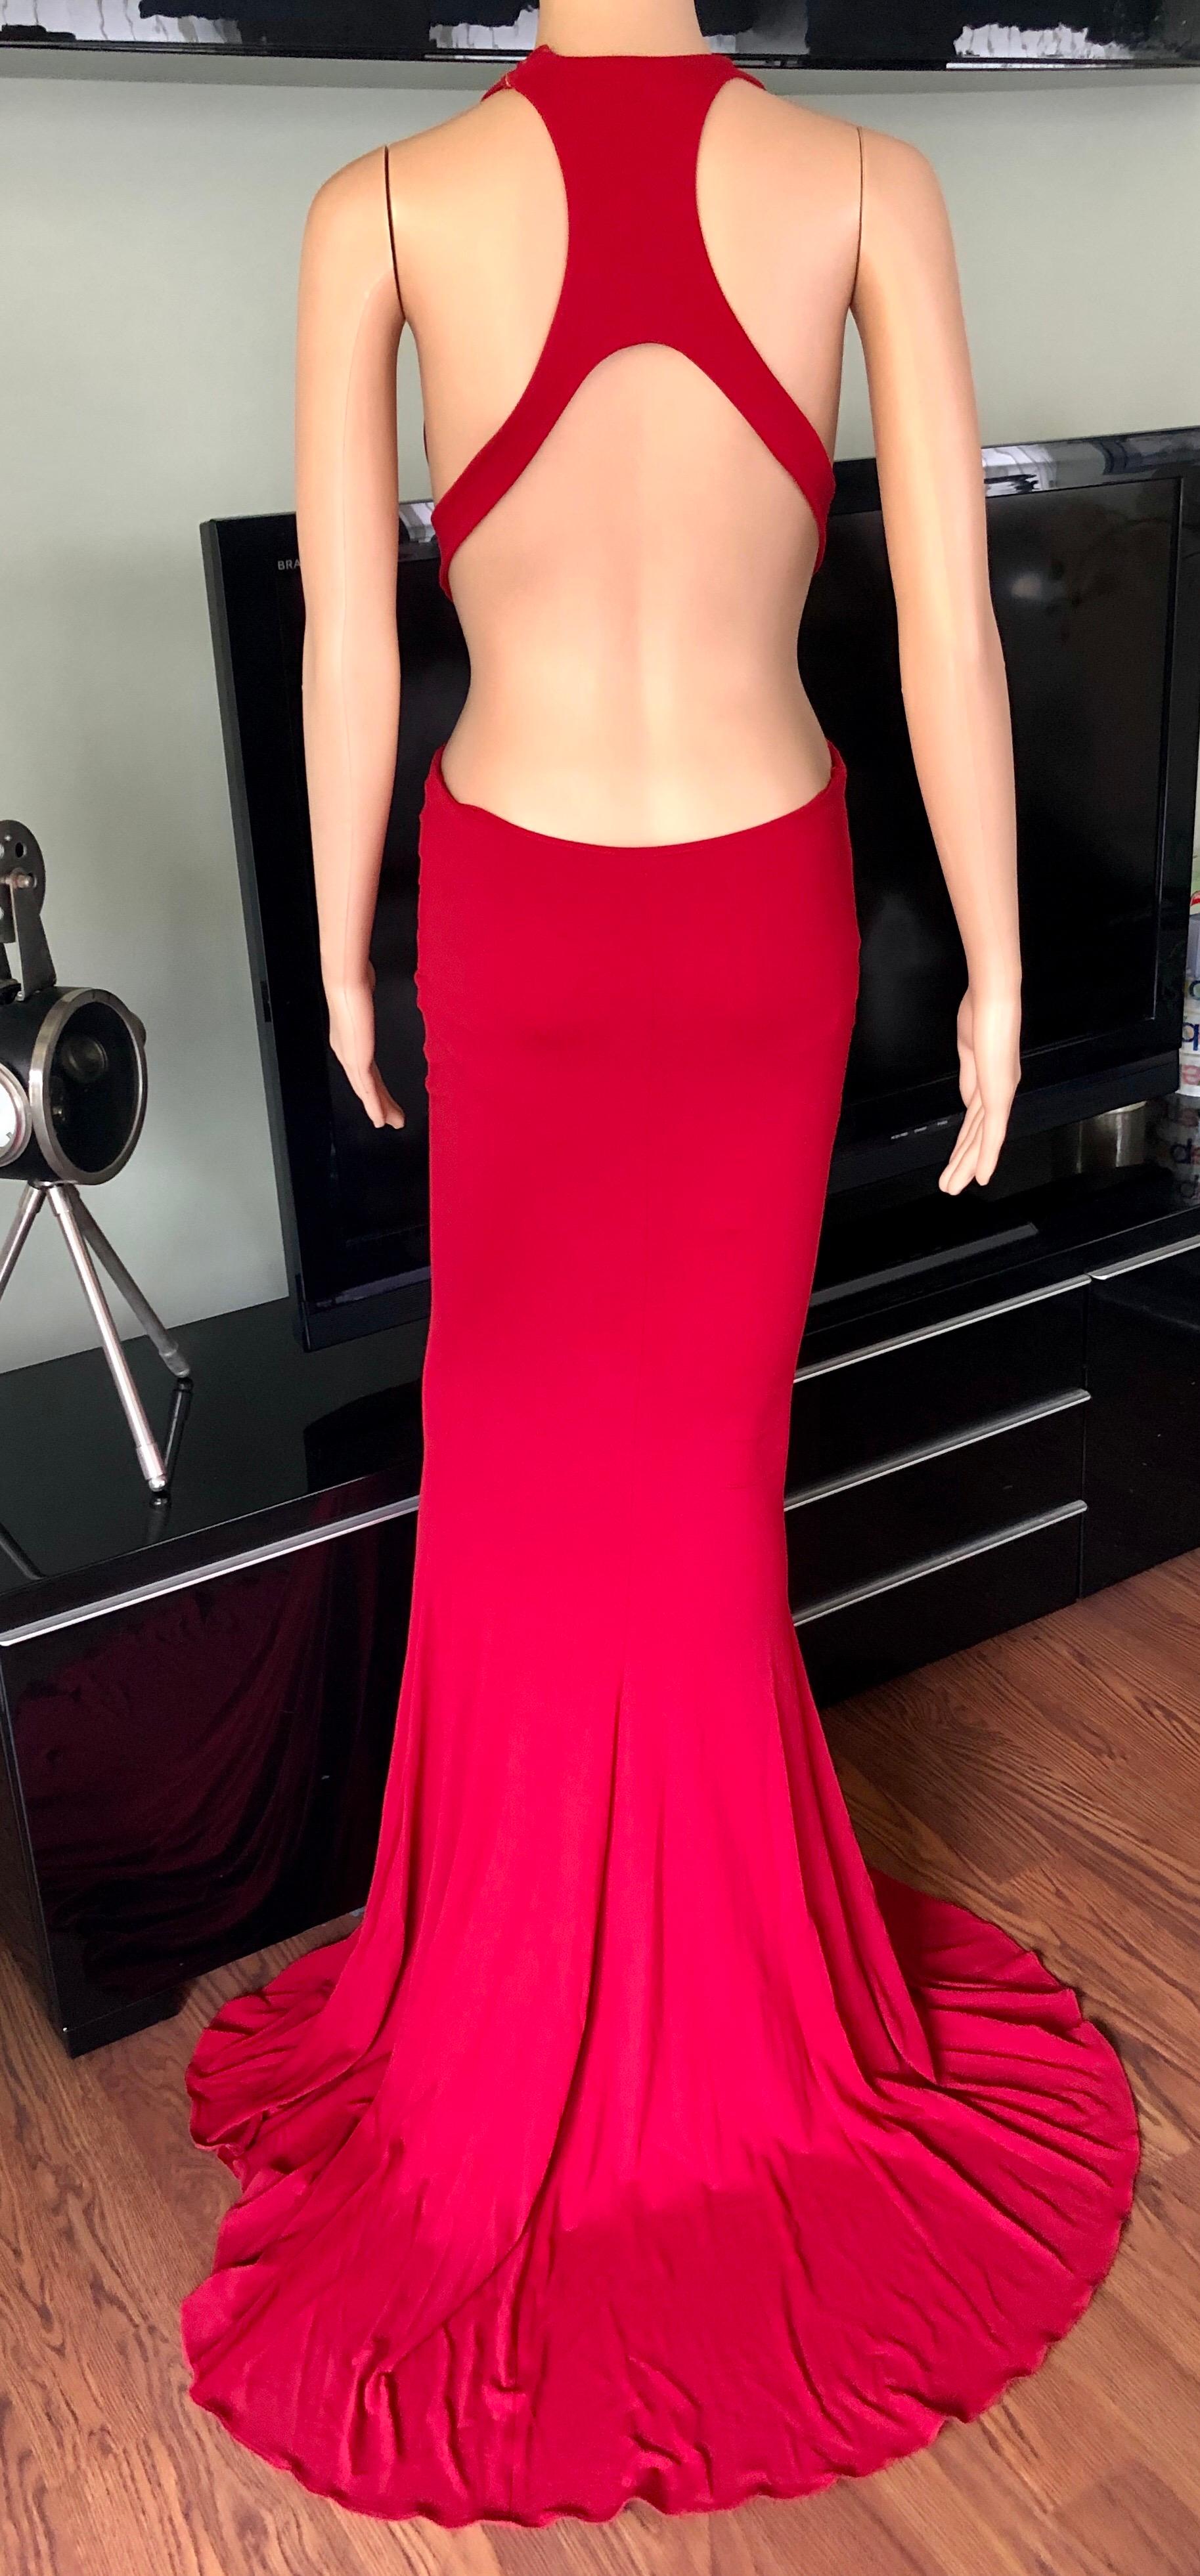 Women's or Men's Alexandre Vauthier Cutout Backless Red Evening Dress Gown  For Sale